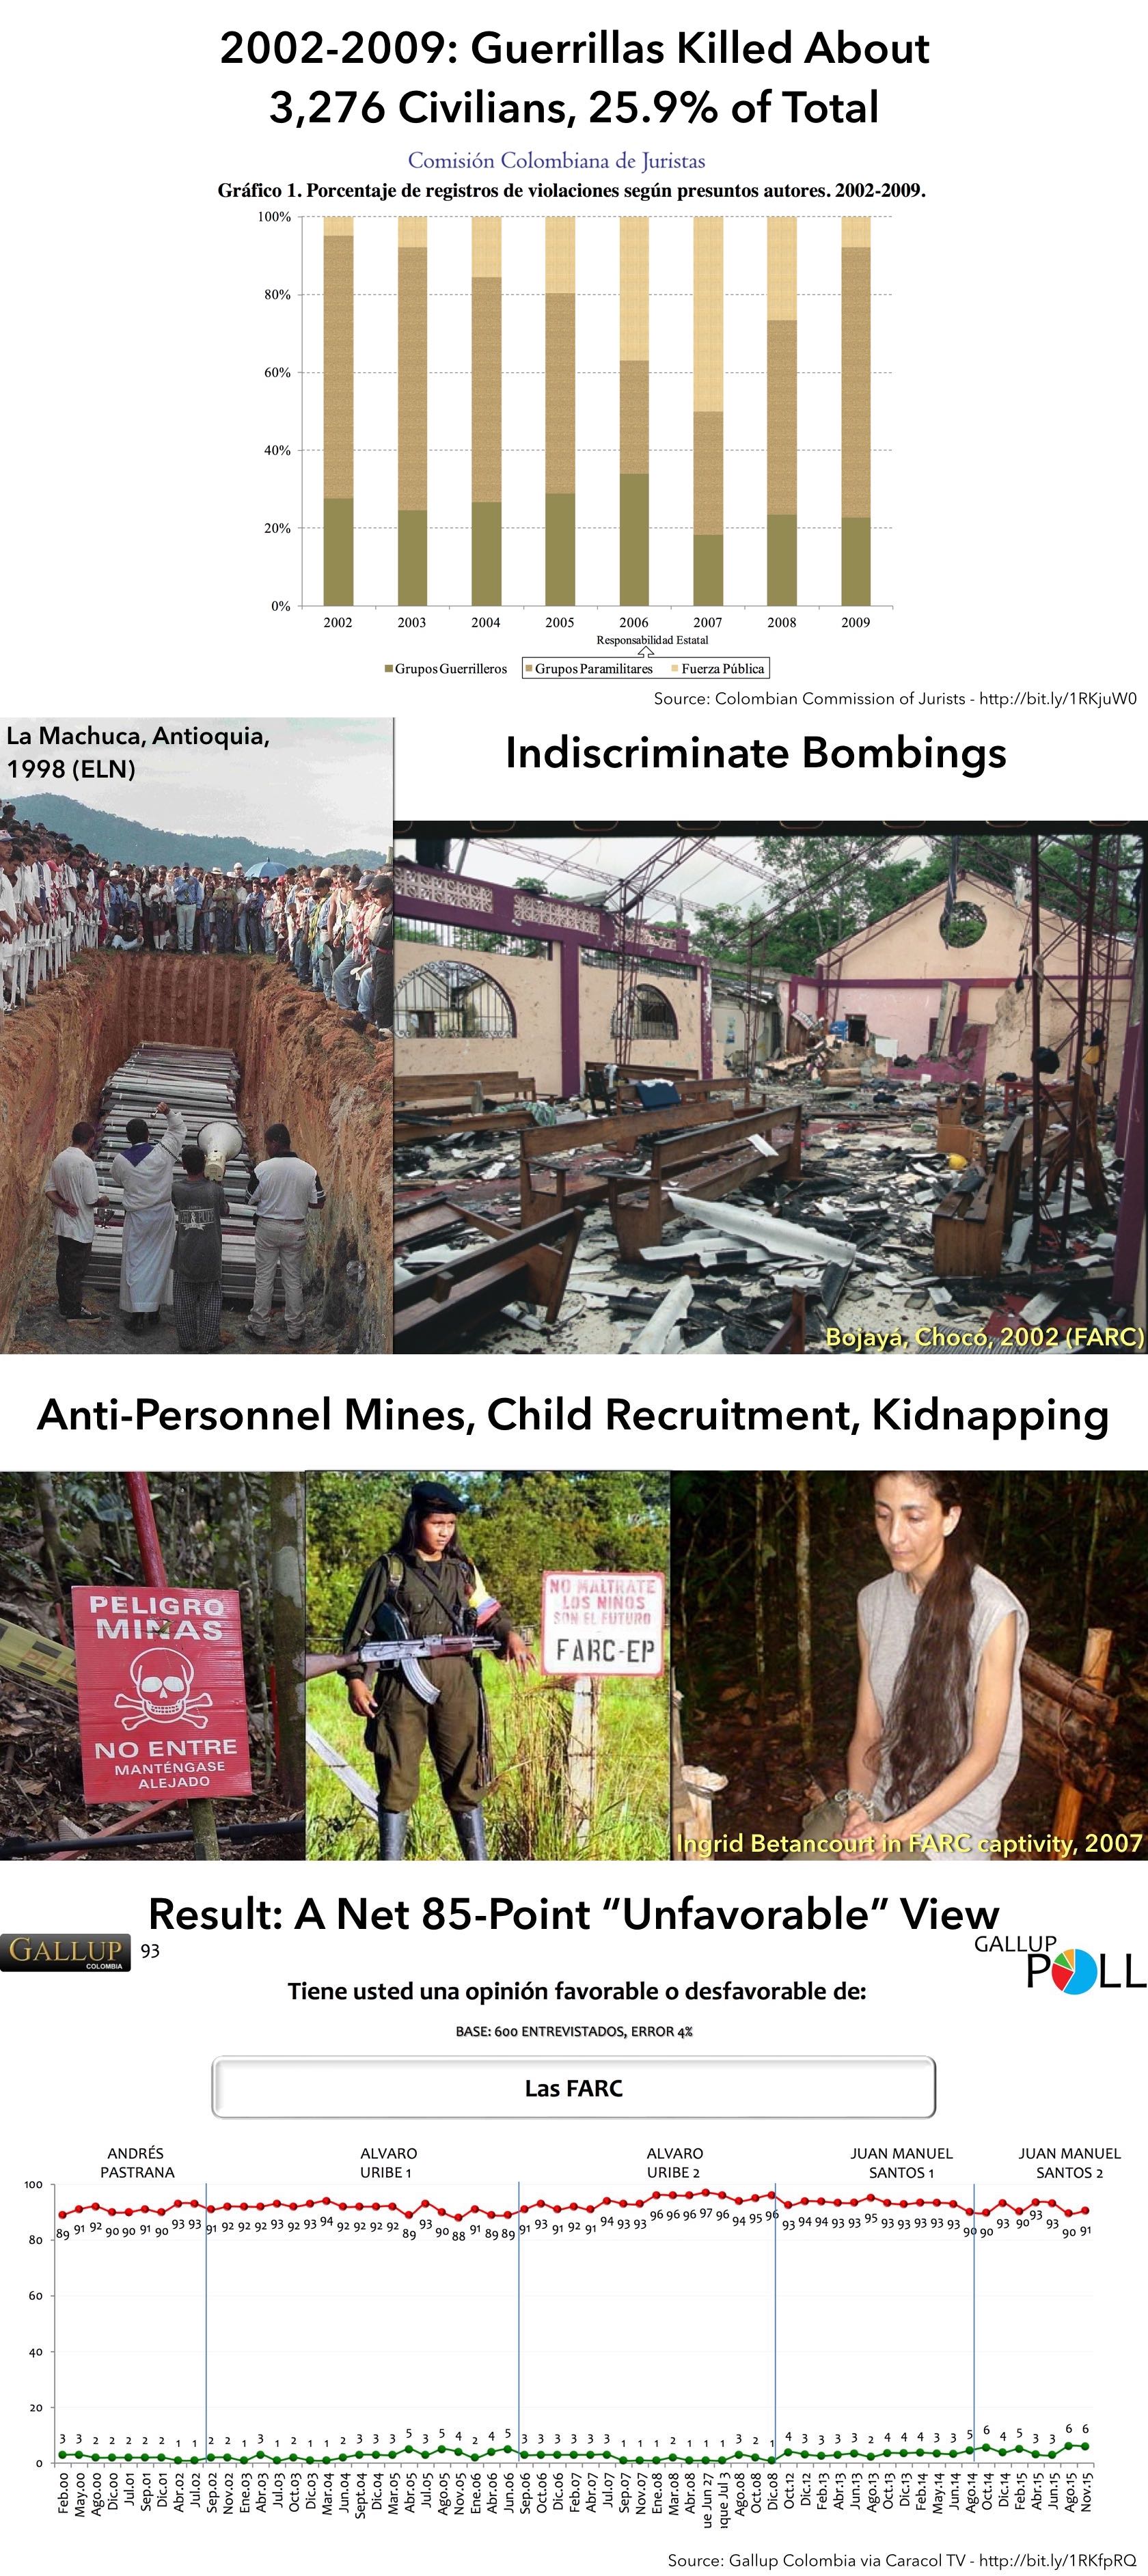 Guerrillas were responsible or about 25.9 percent of civilian killings 2002-2009. Graphics indicate their role in indiscriminate bombings, anti-personnel mines, child recruitment, and kidnapping, and their very low standing in Colombian opinion polls.